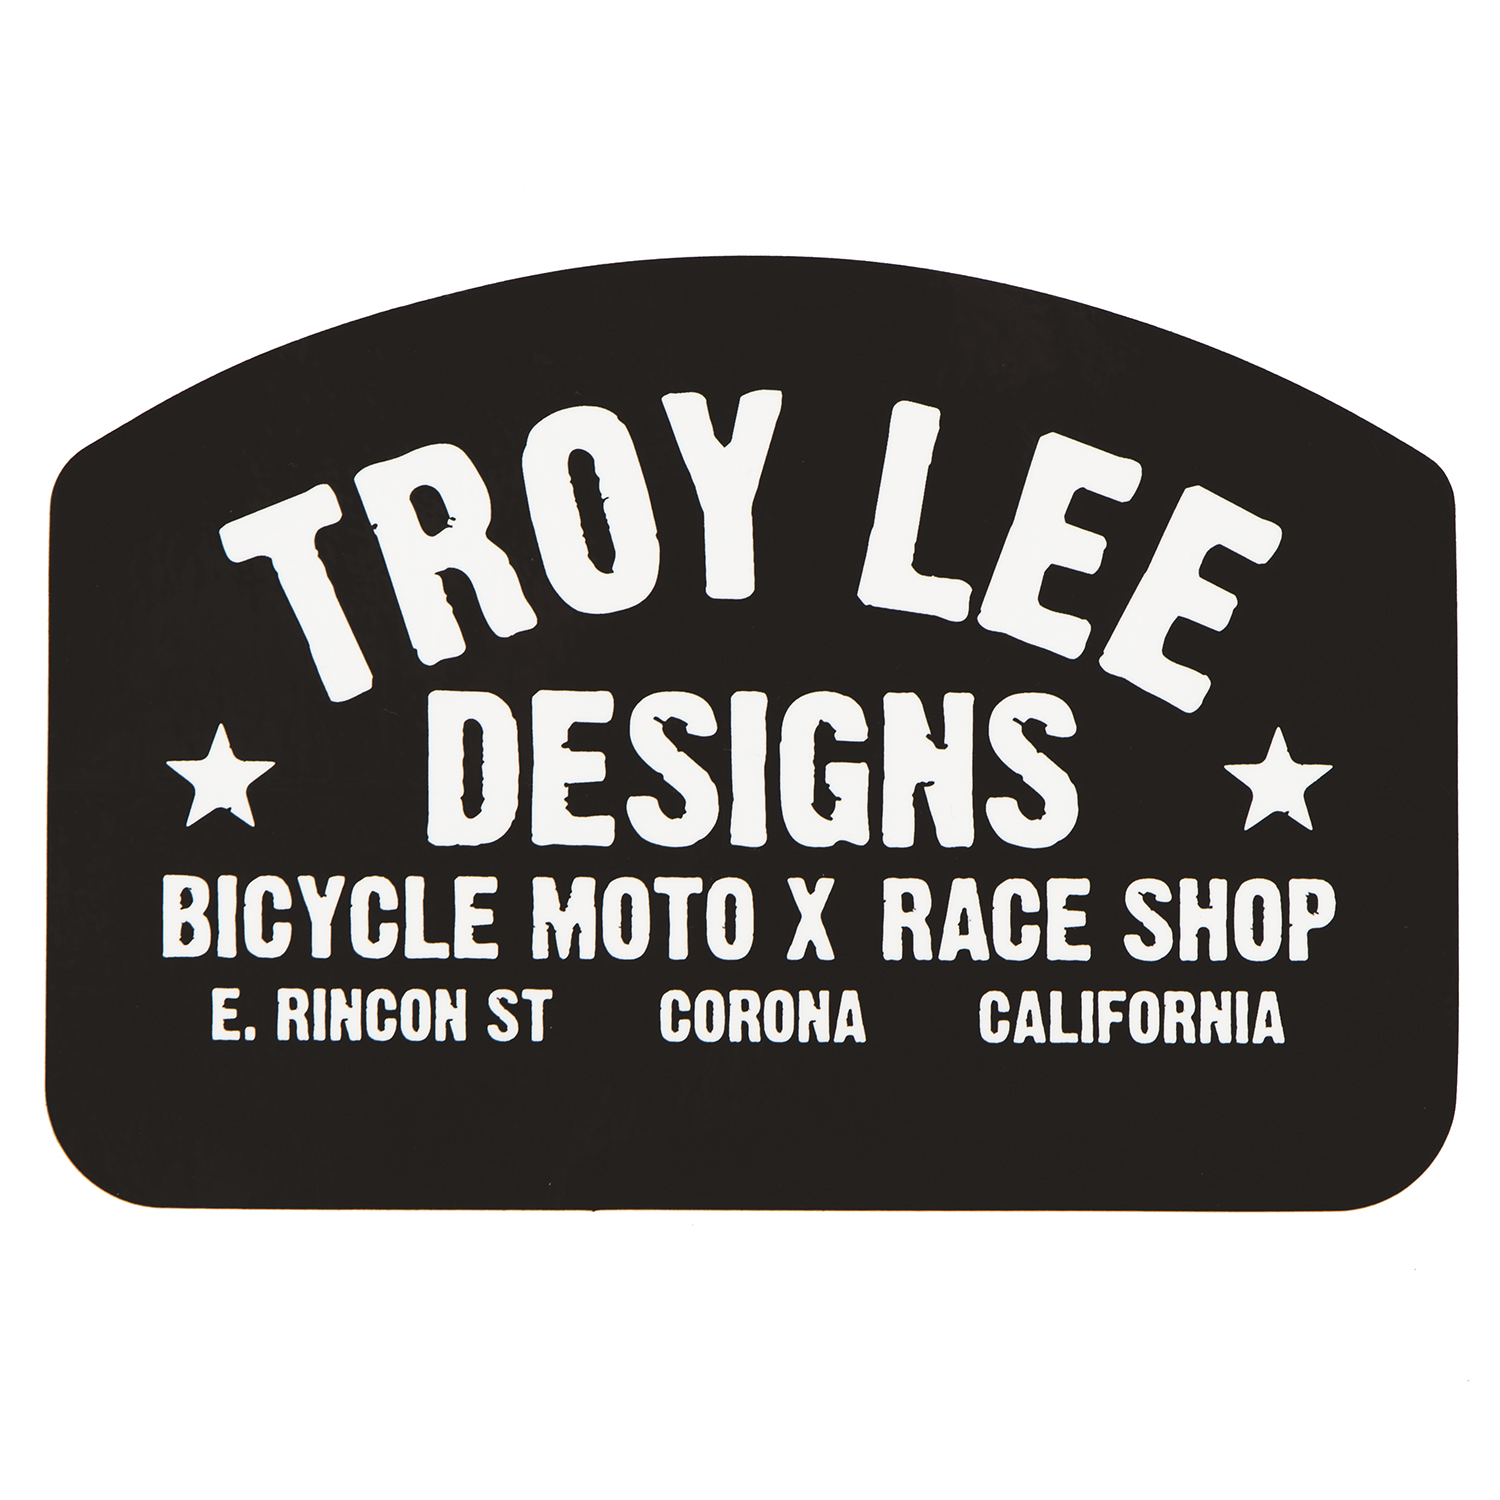 Troy Lee Designs Sticker Race Shop Black/White - 6.5 inches